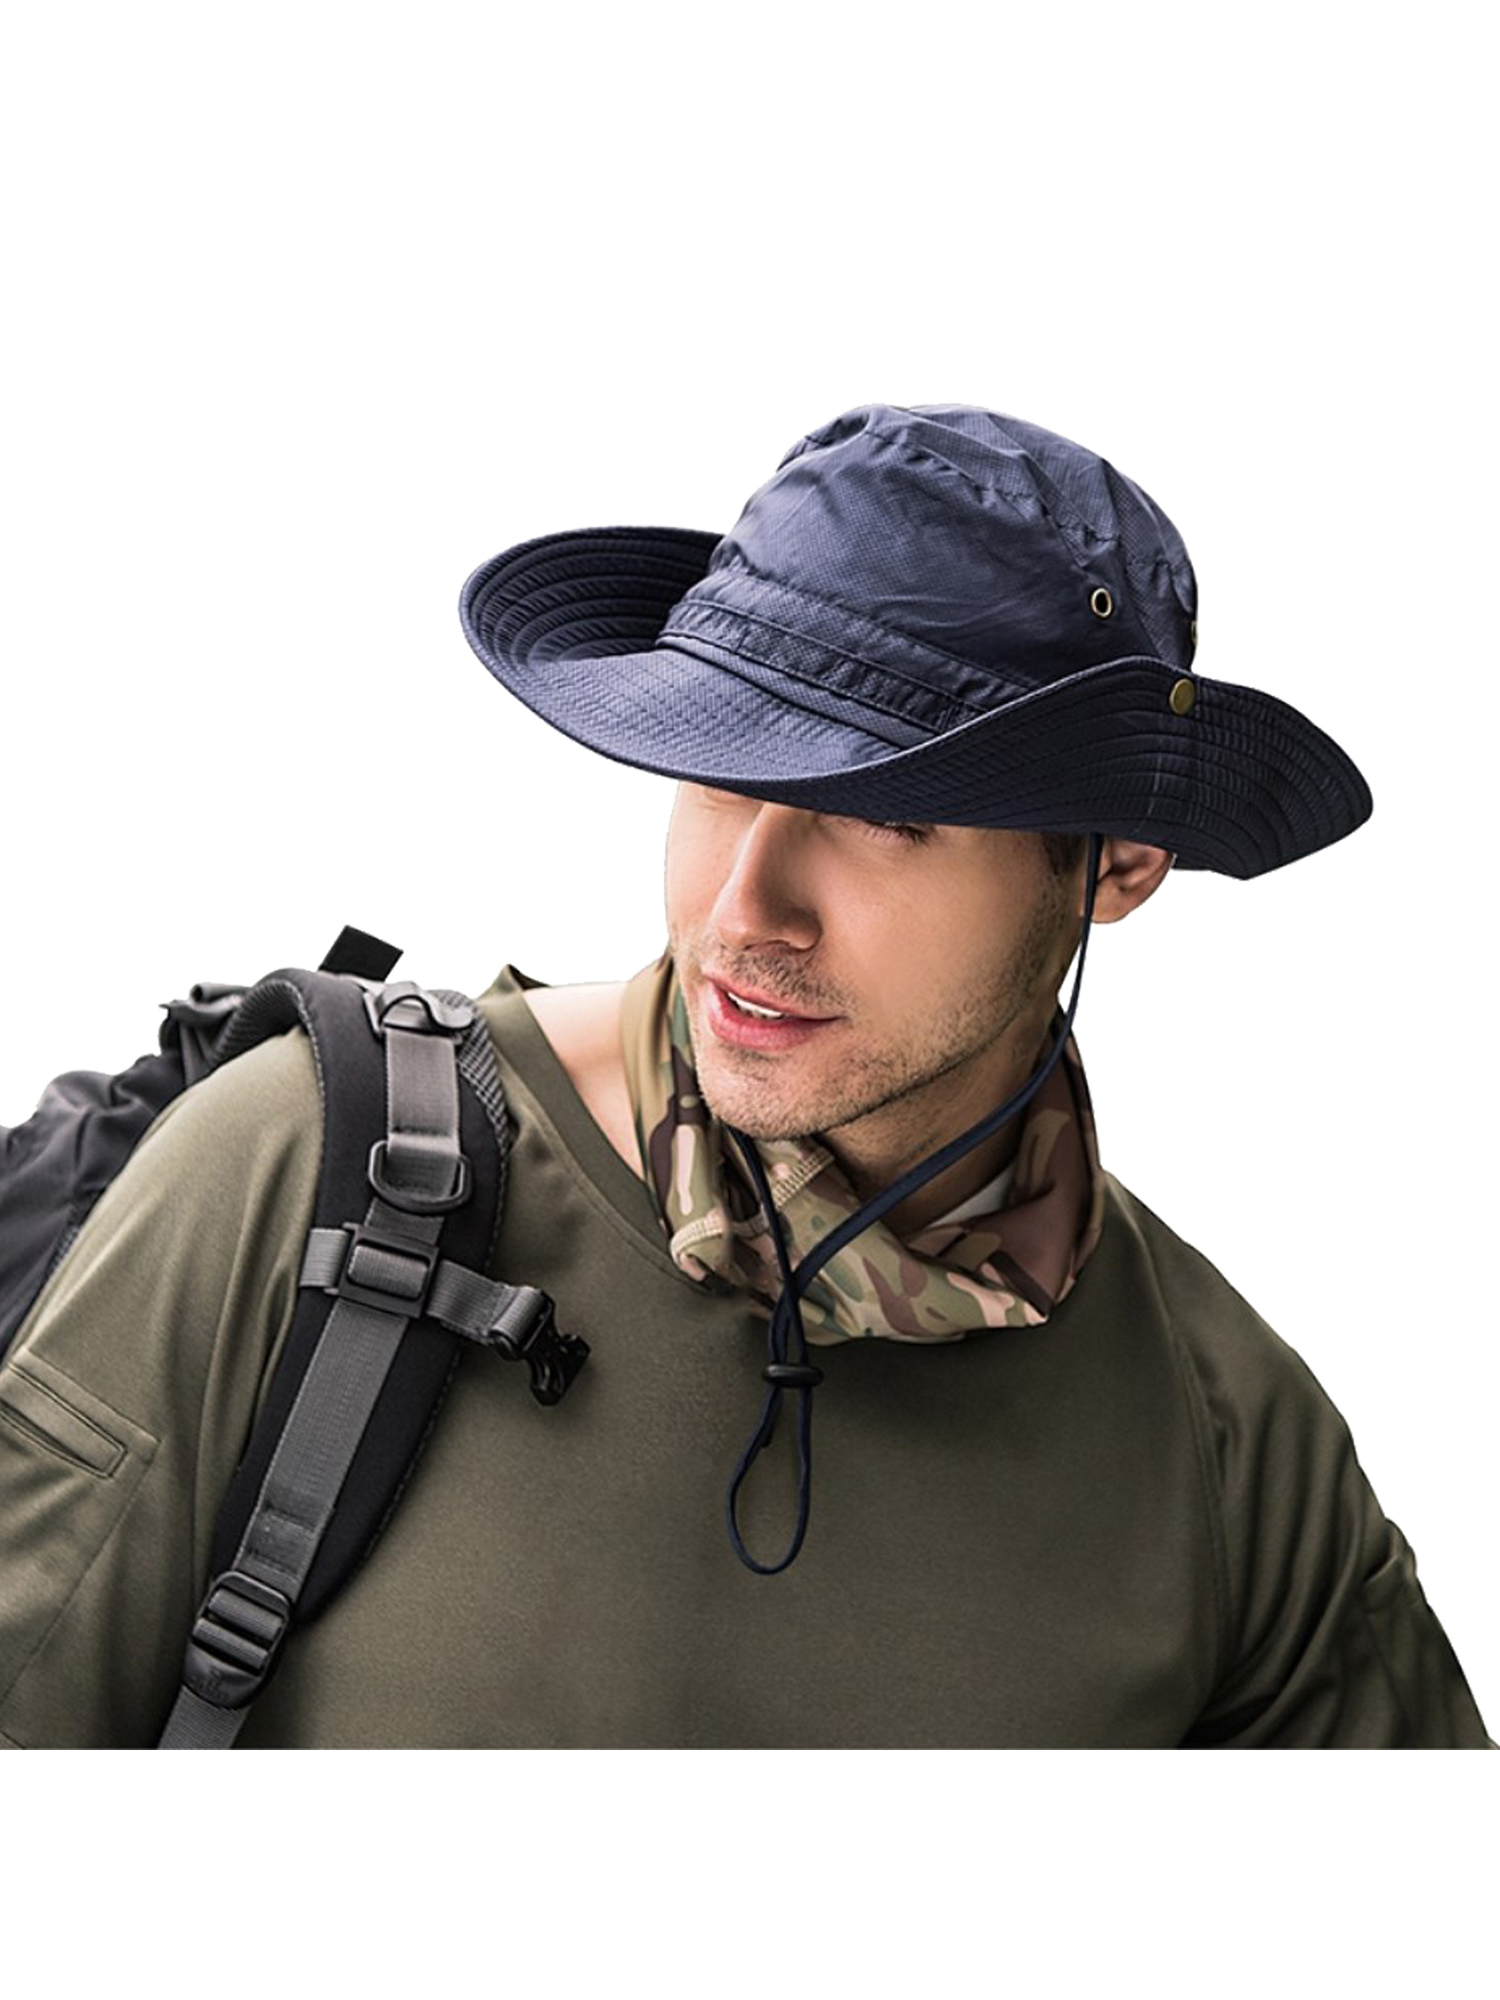 Nituyy Breathable Wide Brim Boonie Hat Outdoor Sun Protection Mesh Safari Cap - image 1 of 2